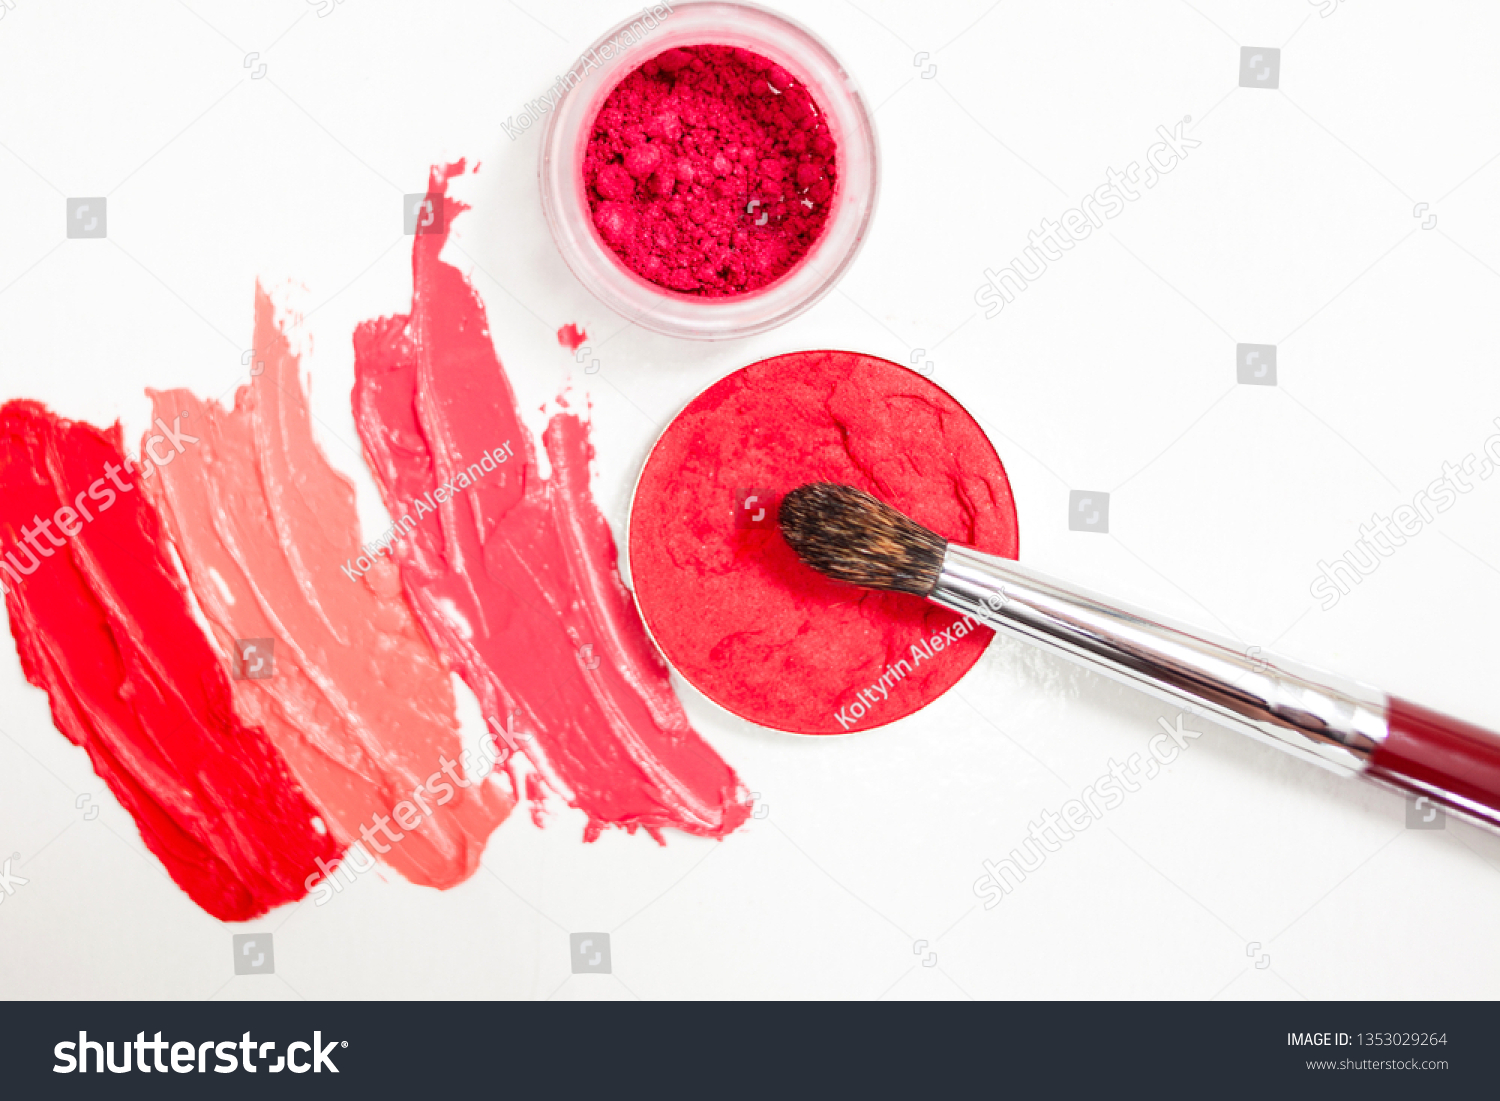 Lipstick and lip gloss, drops and strokes of different shades With brushes for application and shading, white background #1353029264